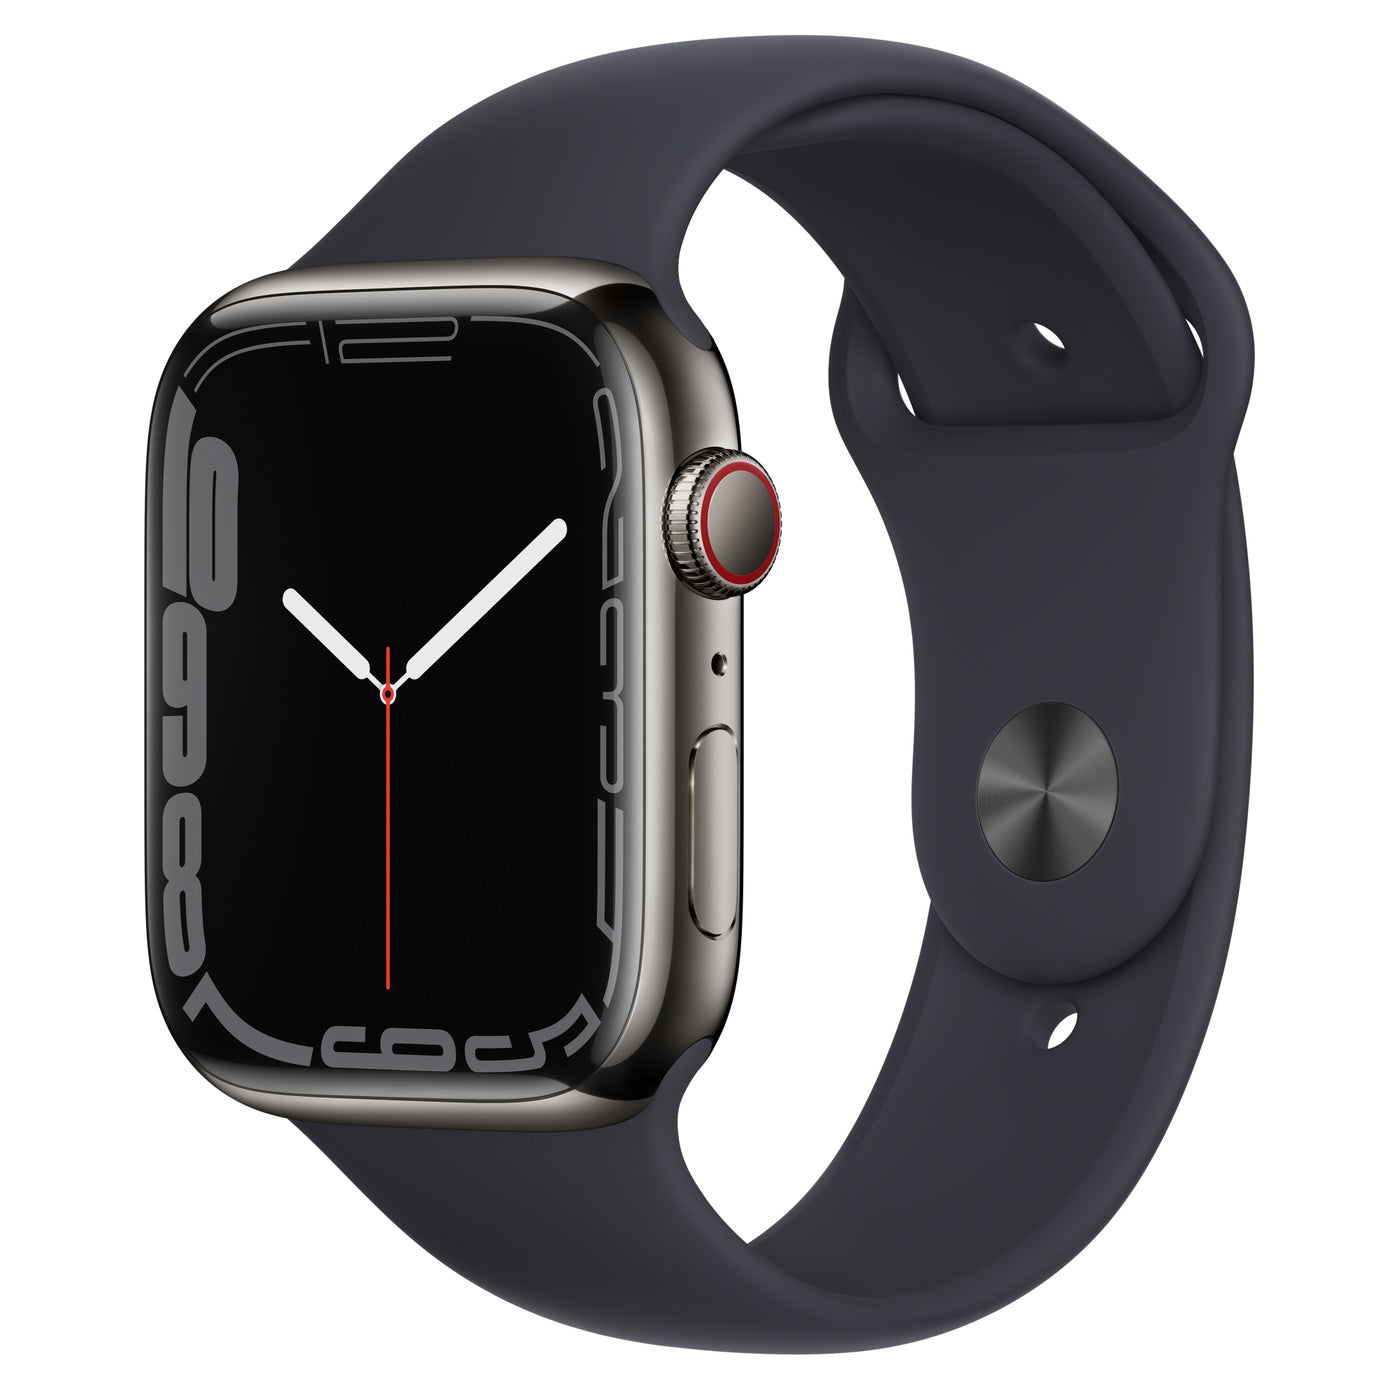 Apple Watch Series 7 (GPS + Cellular) 45mm Graphite Stainless Steel Case with Black Sport Band